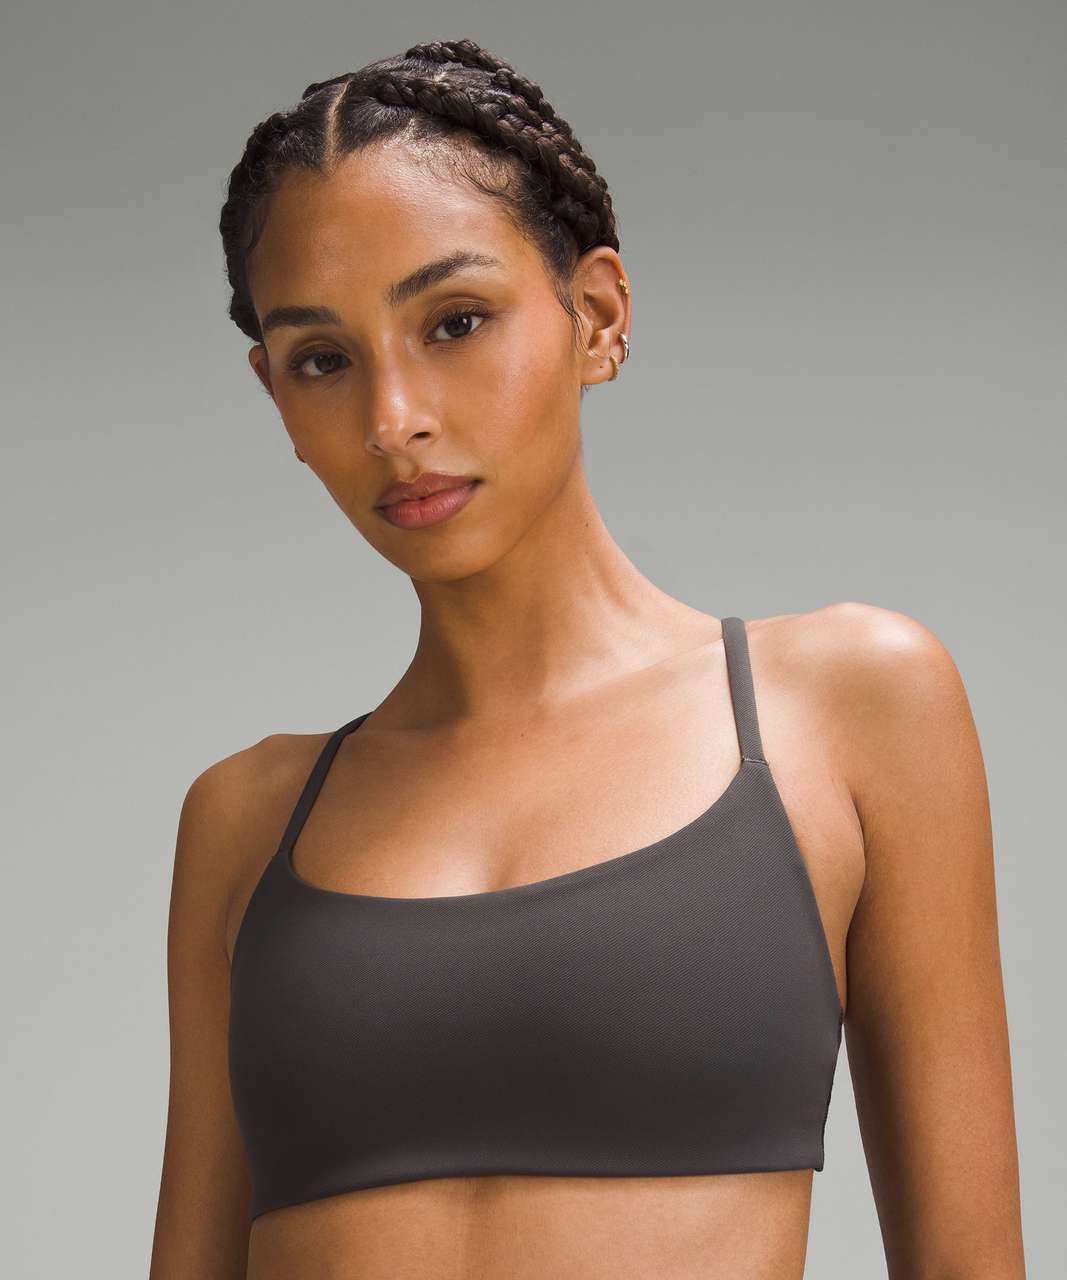 Lululemon Wunder Train Strappy Racer Bra Light Support, A/B Cup *Twill - Graphite Grey